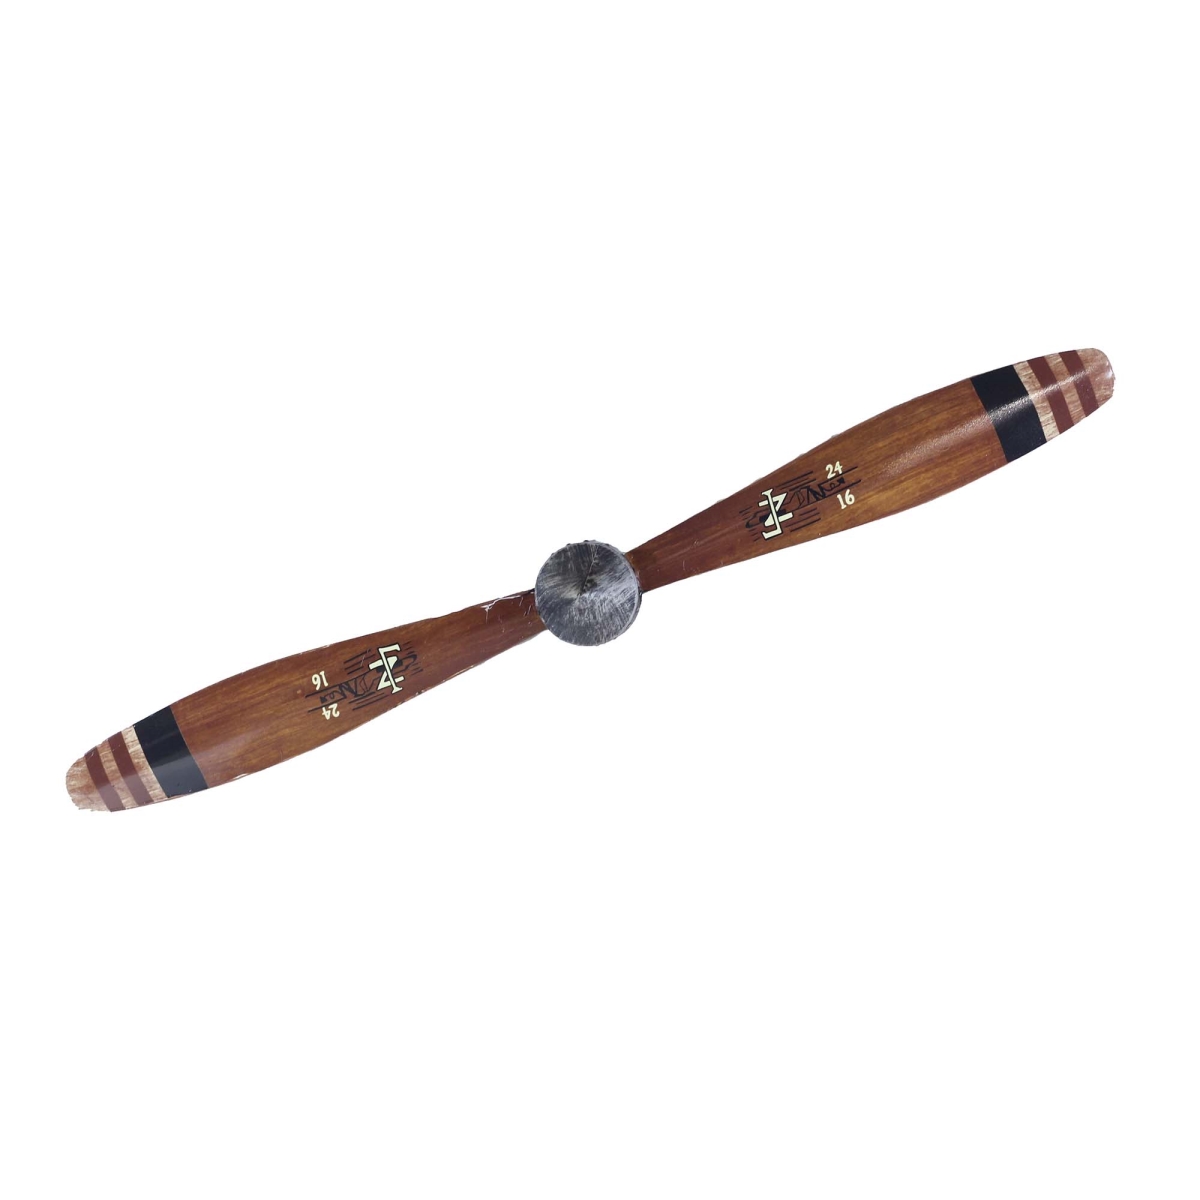 Bm-jq17402s Metal Painted Airplane Propeller Wall Decor - Small